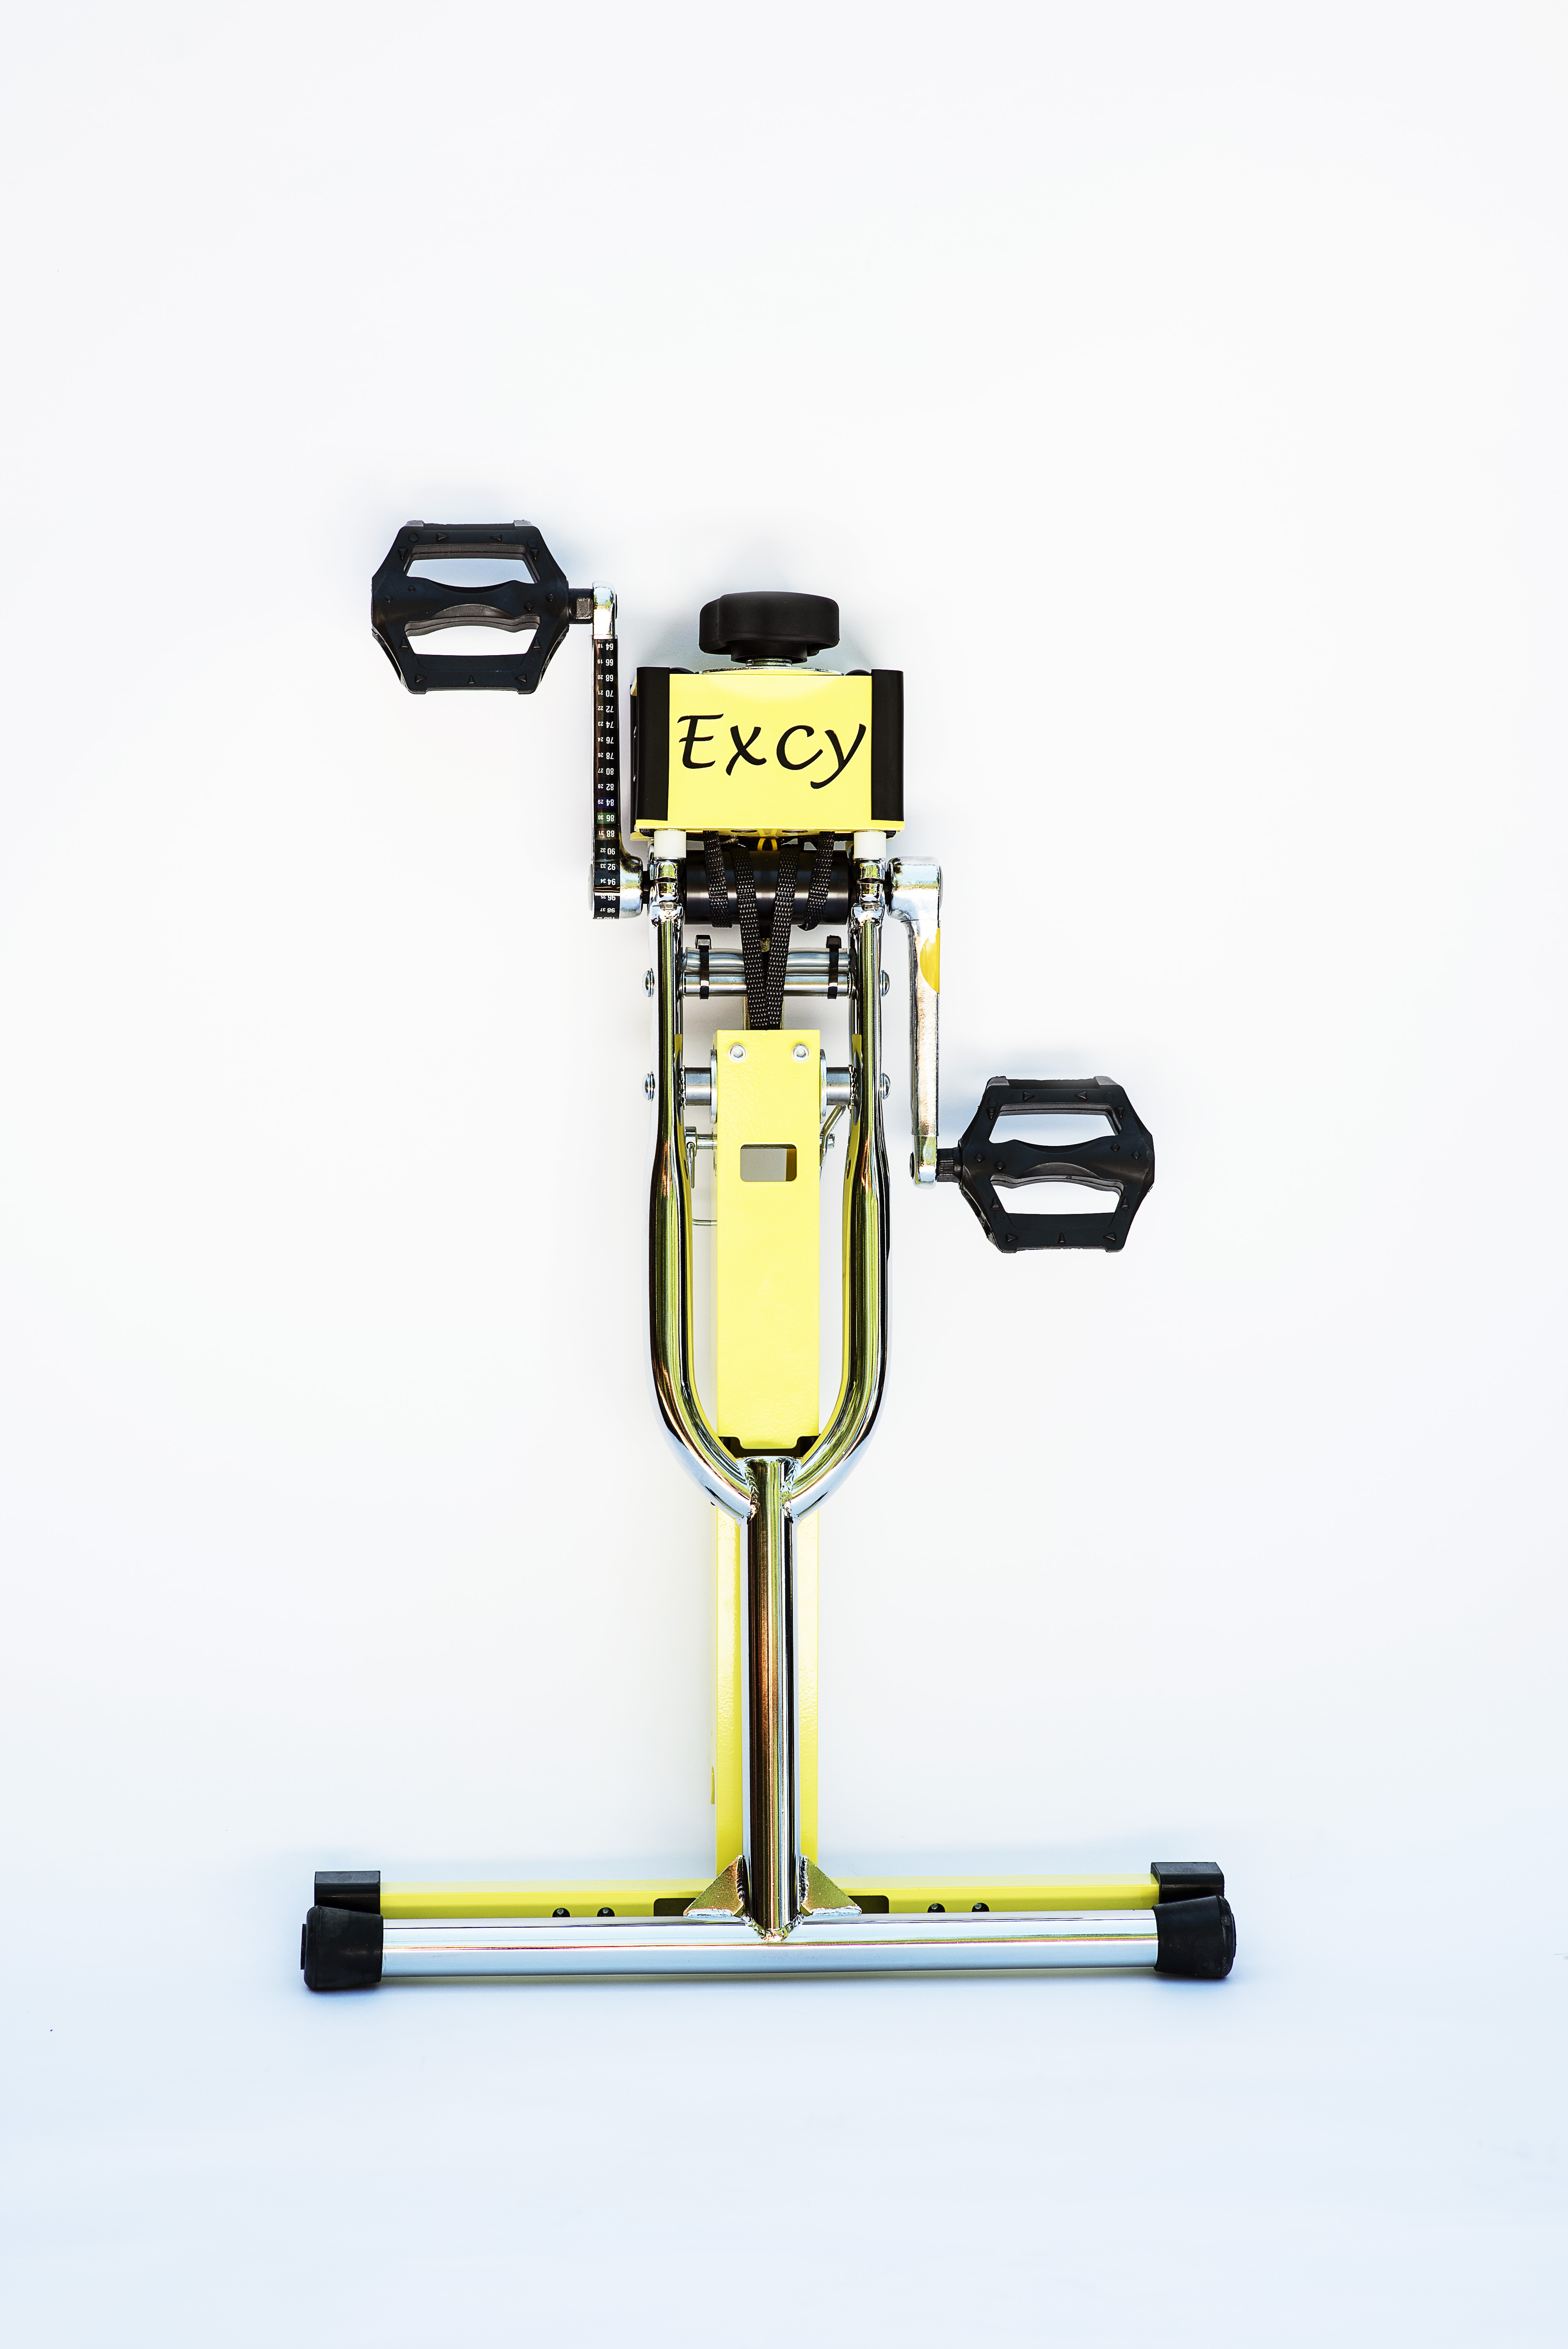 Excy Makes Medical Fitness More Accessible for Hospital Patients with New XCS Pro